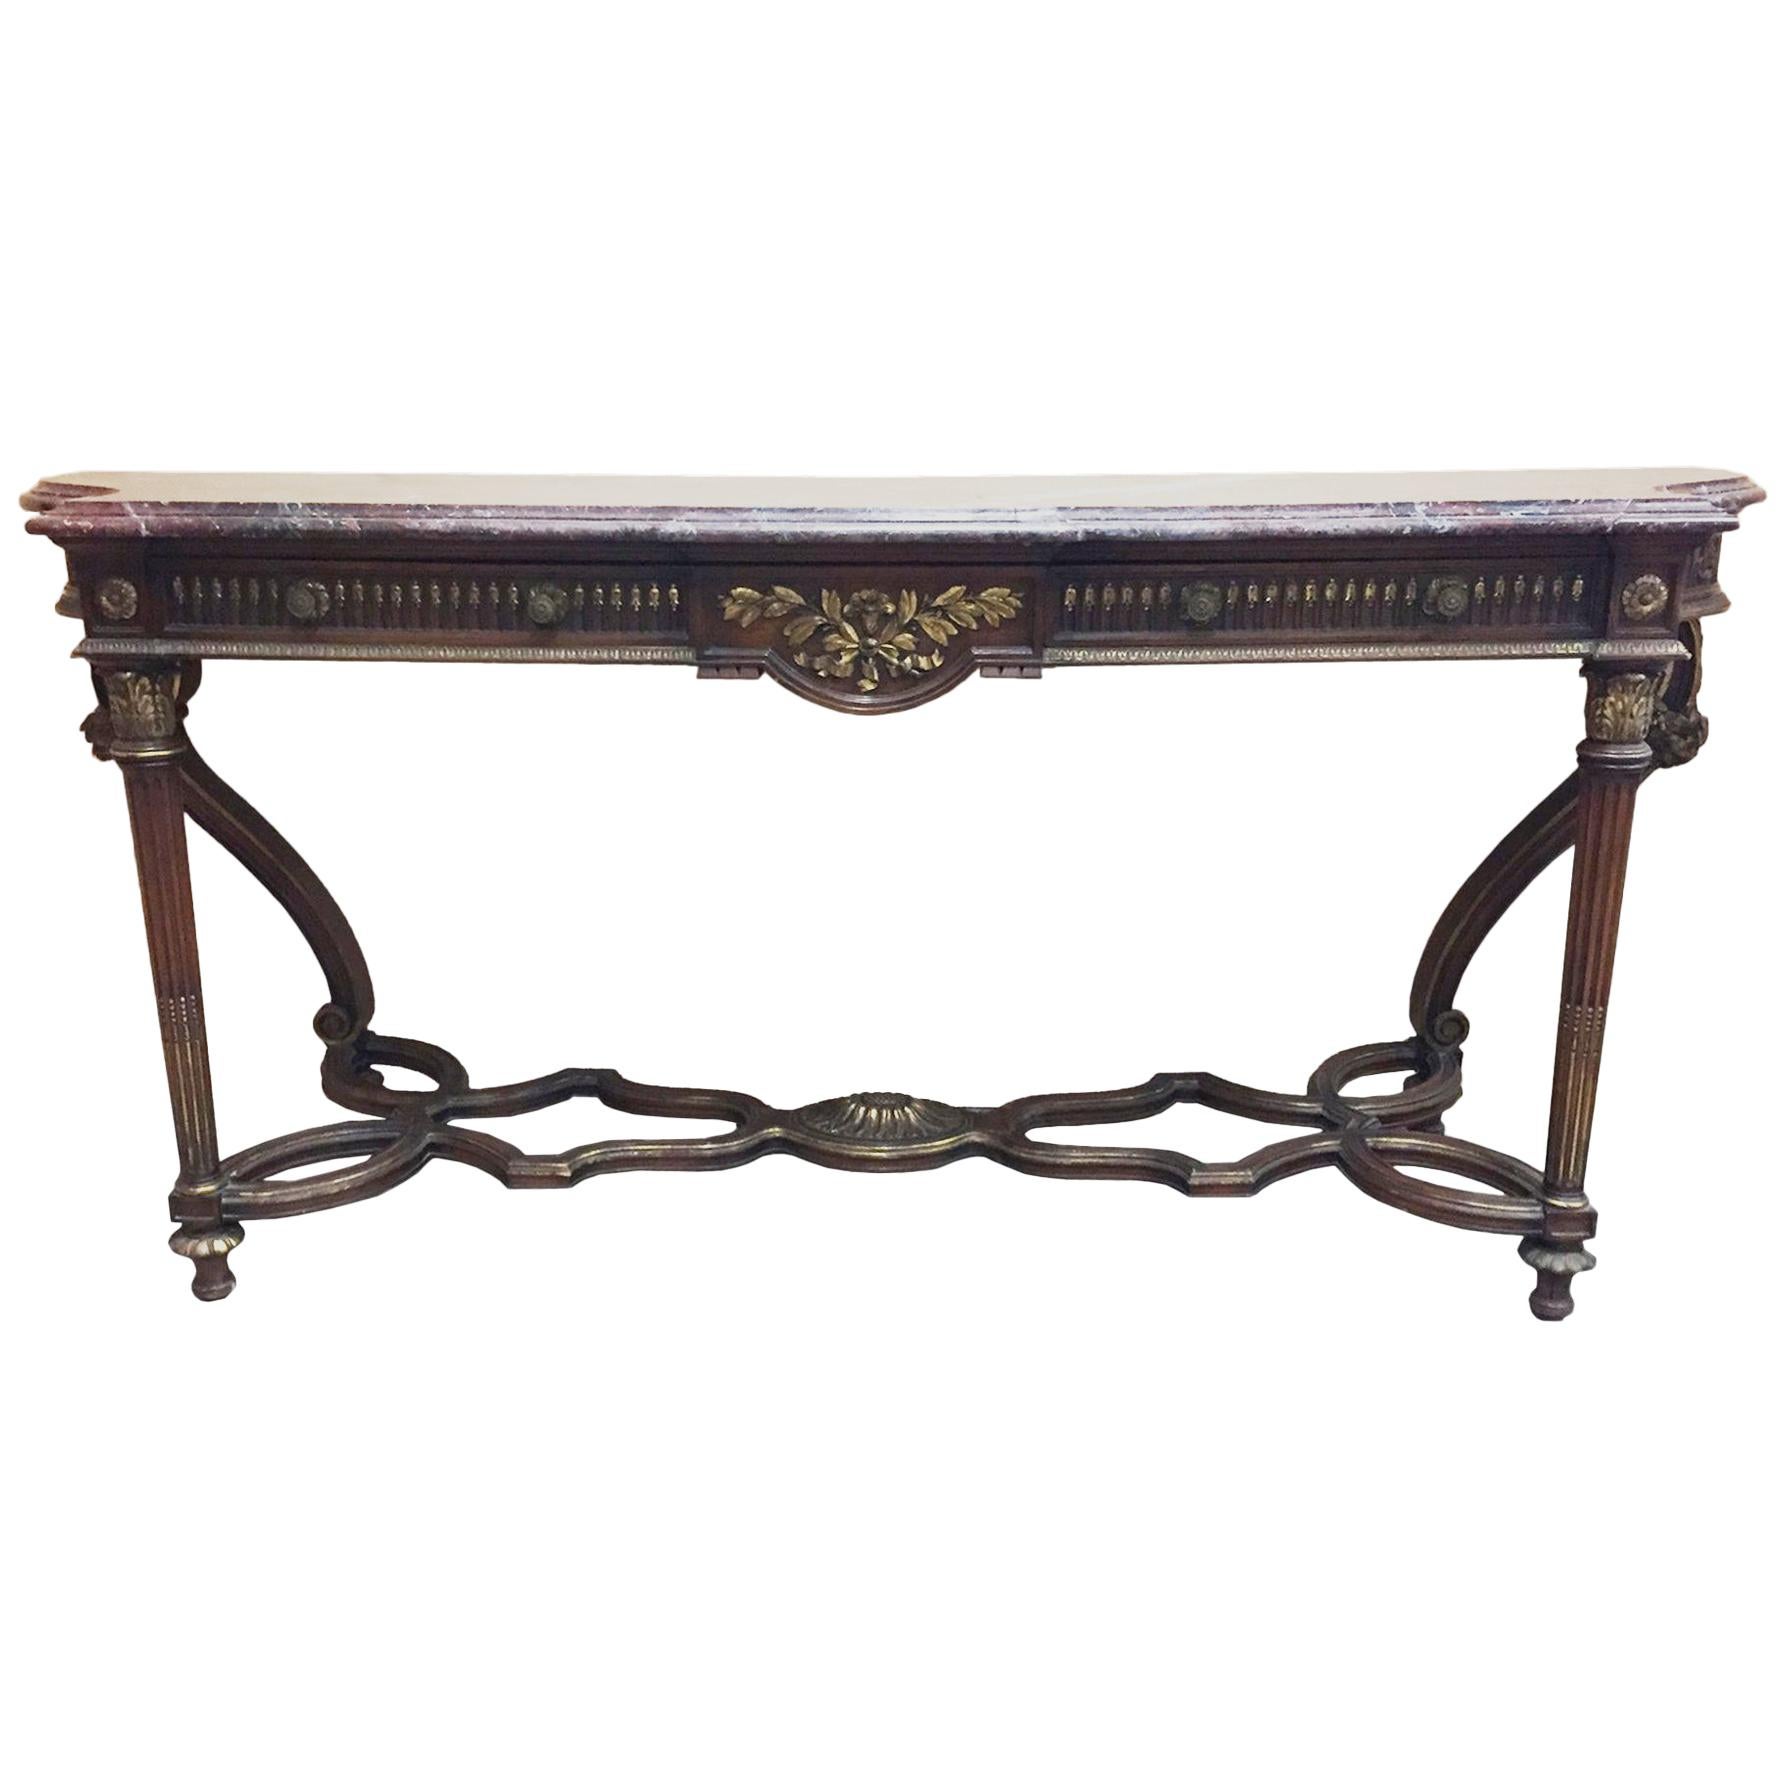 Italian Neoclassical Style Long Console, 19th Century